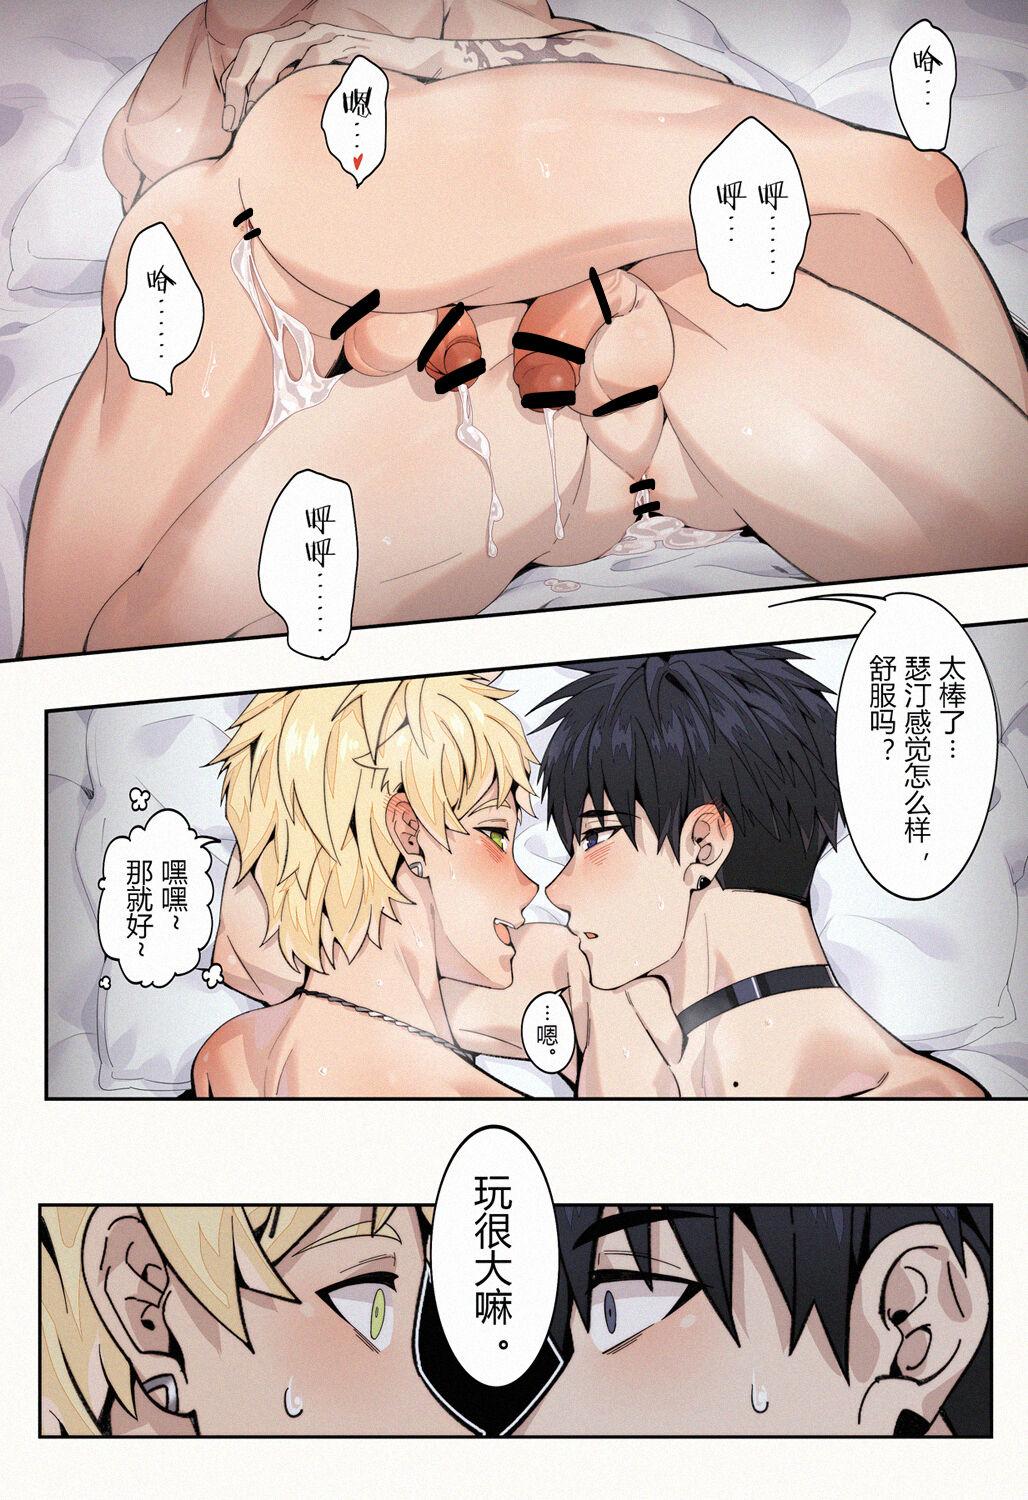 Spoon OC互攻小剧场 Gay Physicals - Page 3